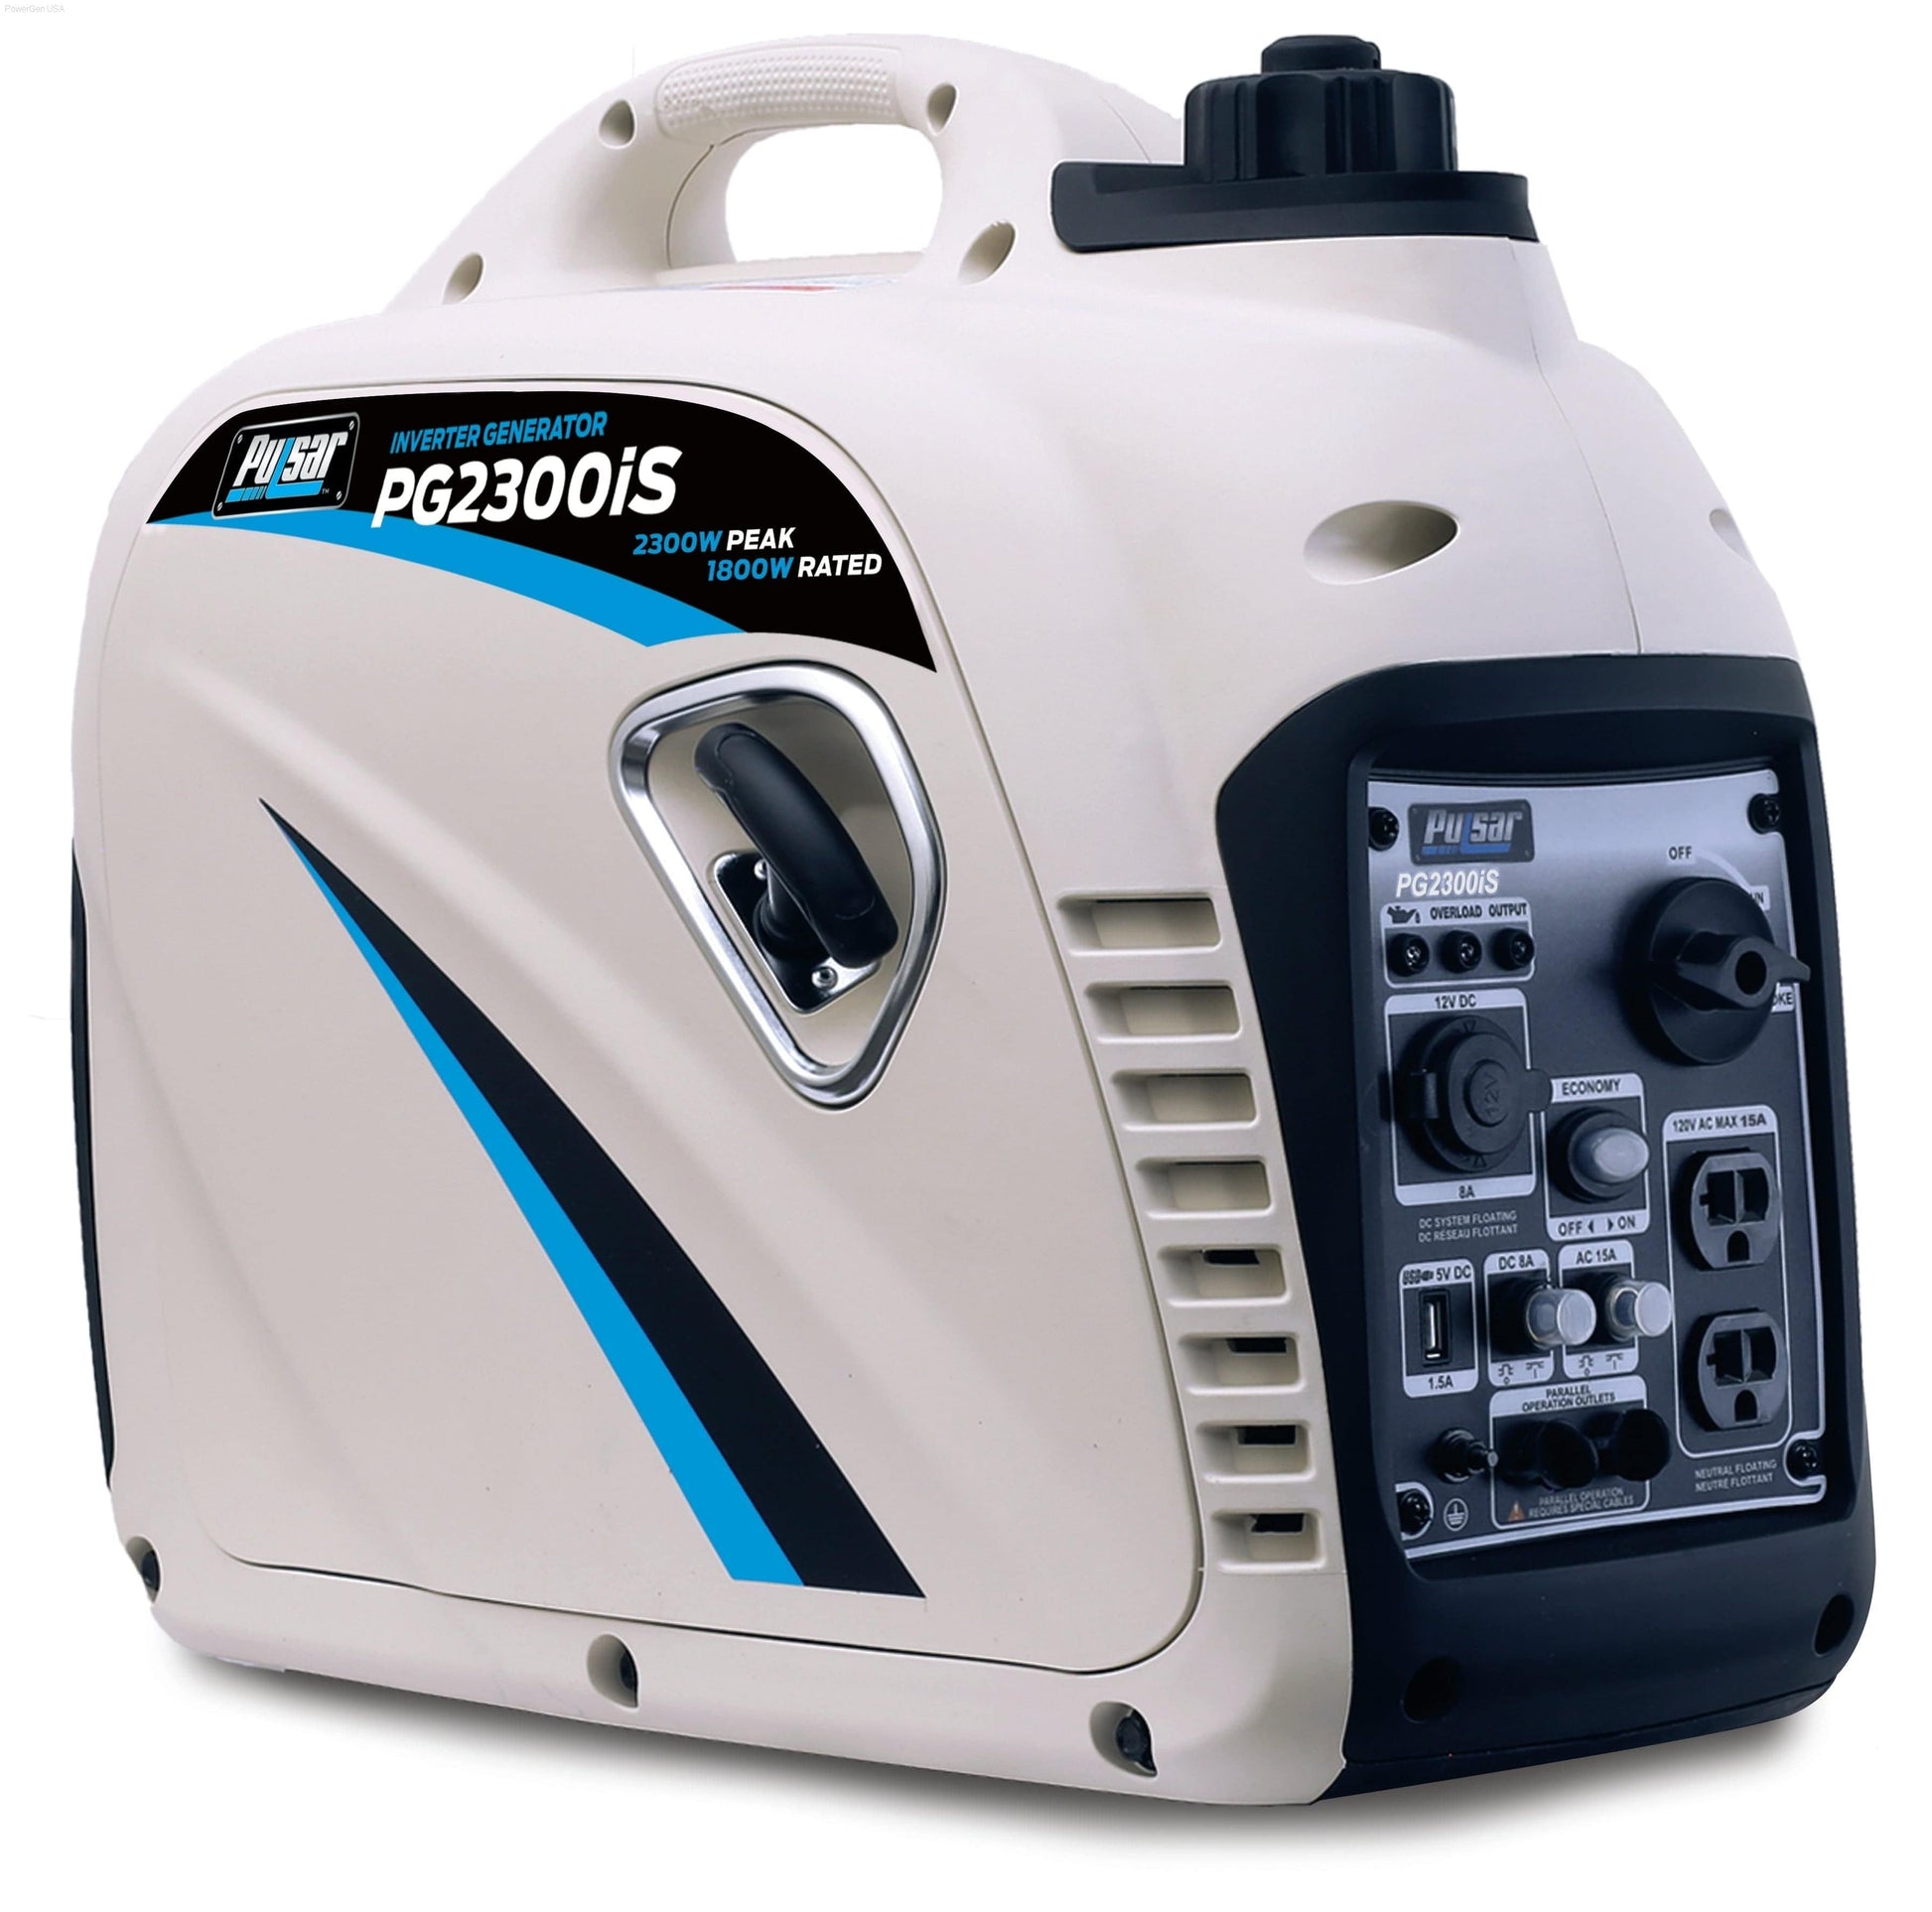 Gas Generators - Pulsar PG2300iS-Inverter 2300W Generator RATED 1800W, Carb Approved